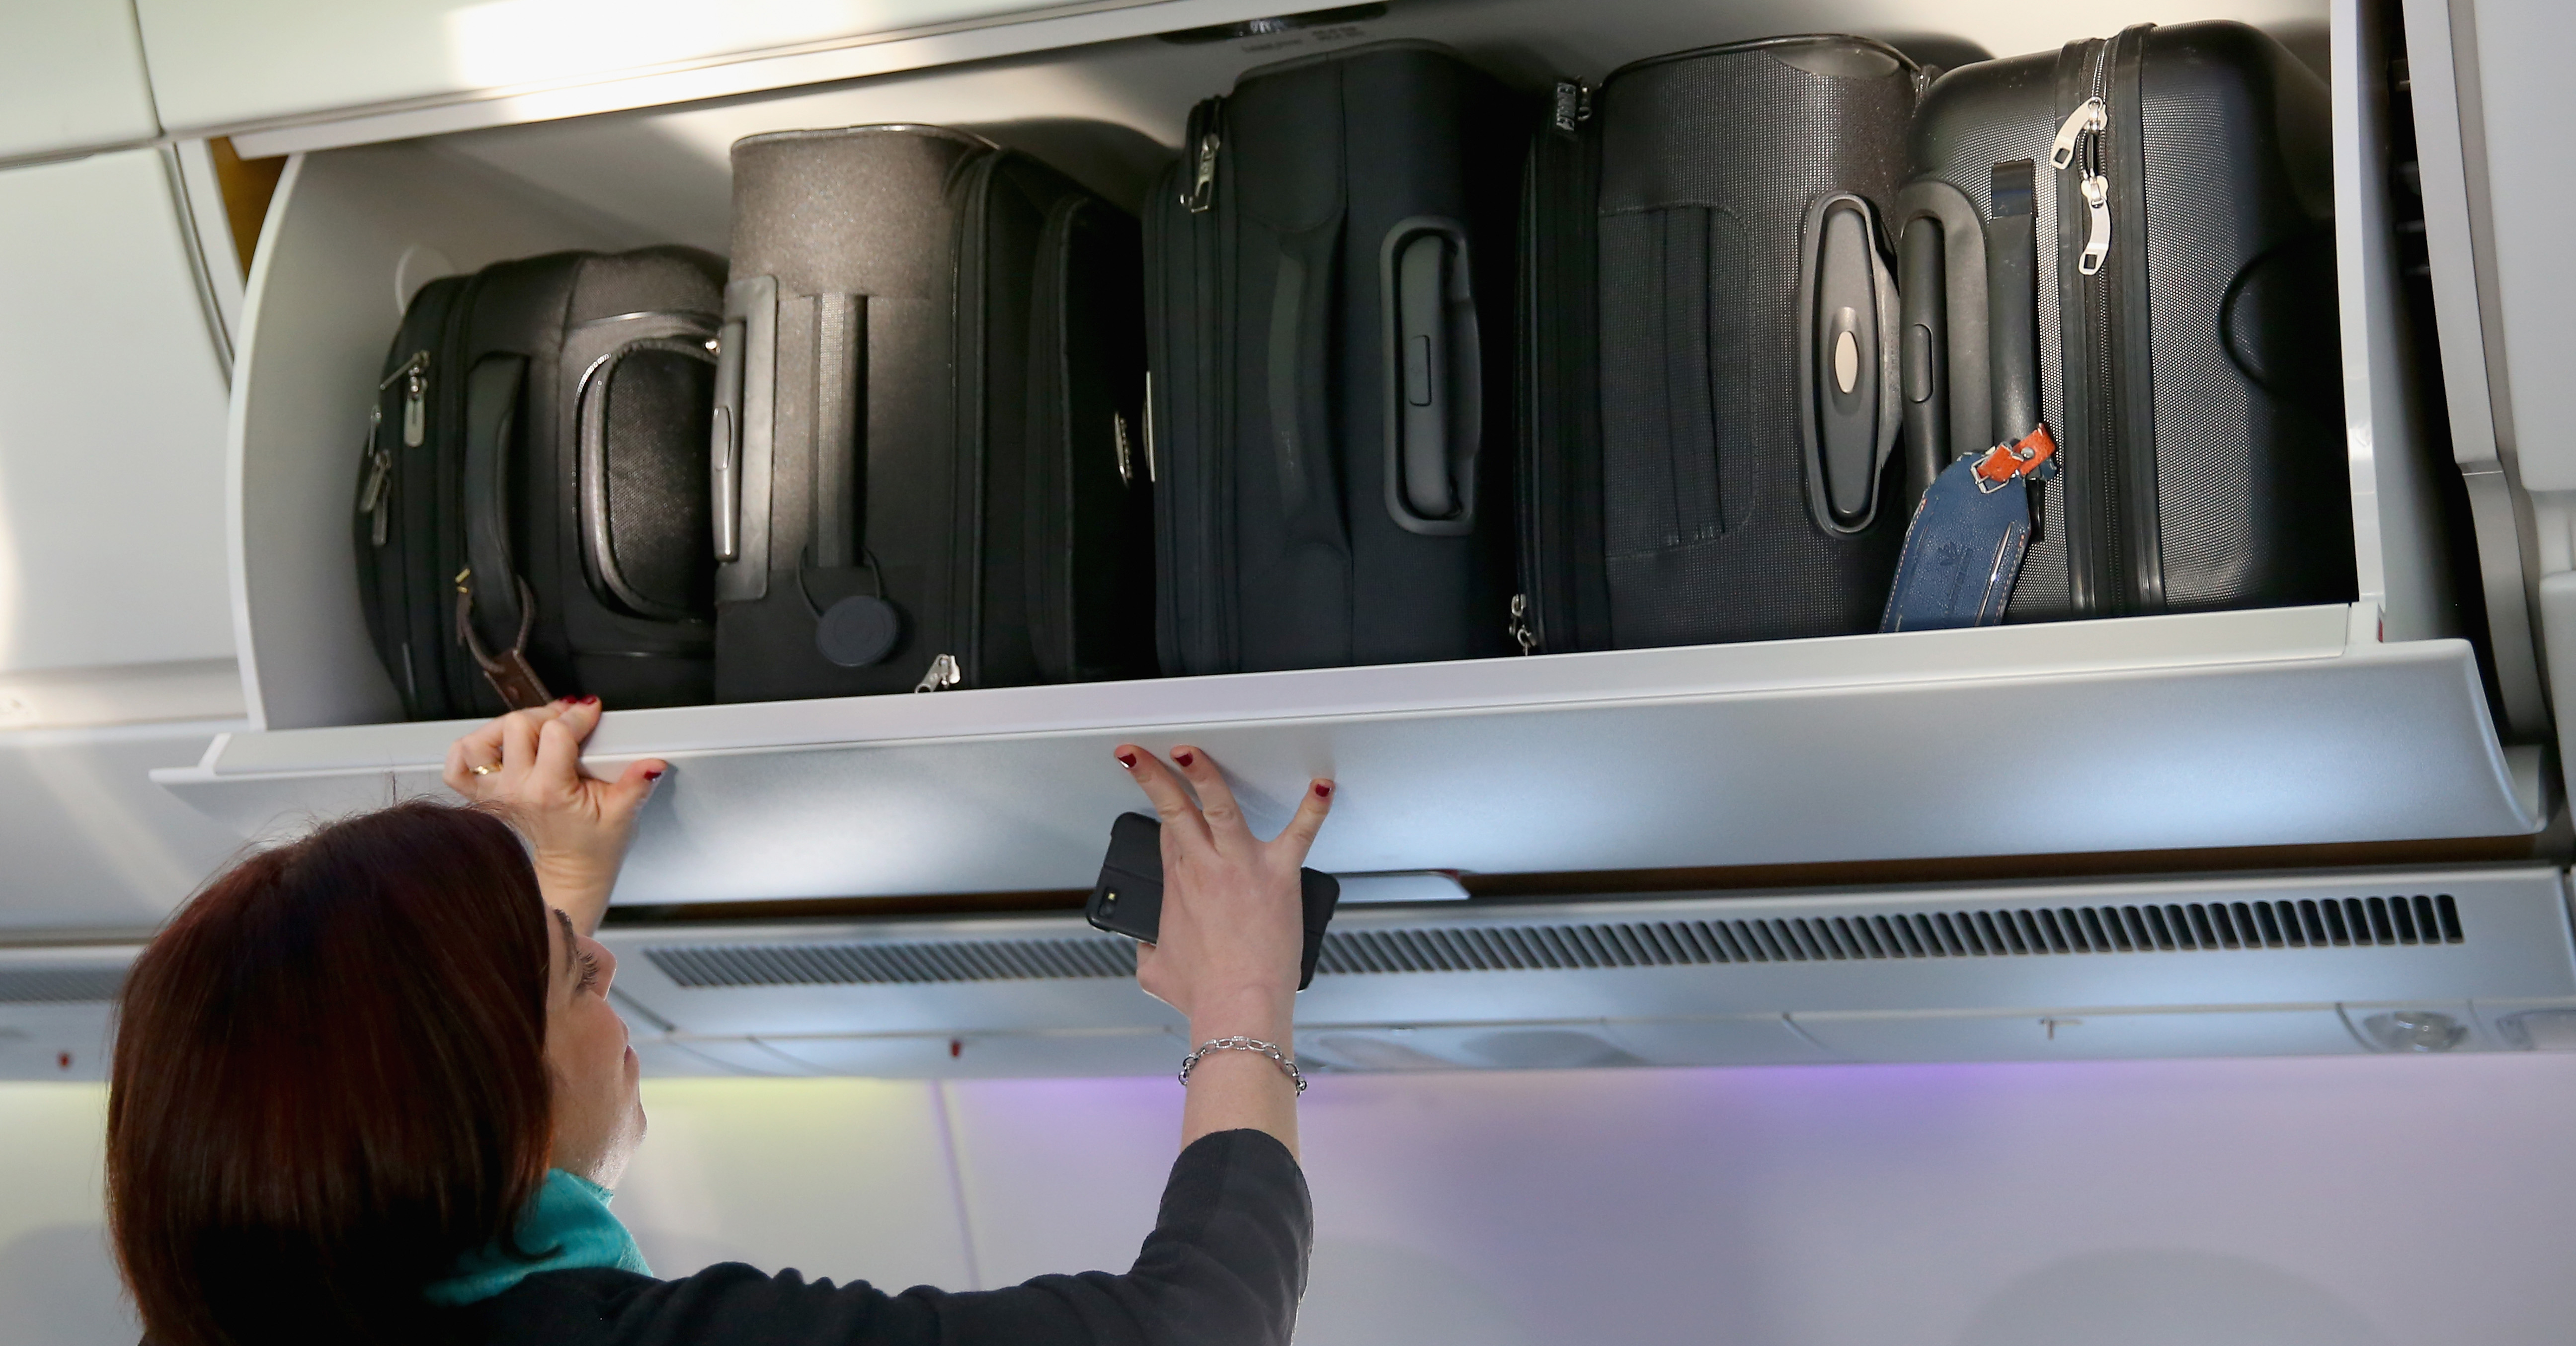 MUNICH, GERMANY - FEBRUARY 27:  The hand baggage overhead bins in the cabin of a new Airbus A350X WB passenger plane on the tarmac at Munich Airport during a presentation of the new plane by Airbus officials on February 27, 2015 in Munich, Germany. The A350 is a long-distance passenger plane that Airbus has developed to compete against the Boeing 787 Dreamliner.  (Photo by Alexander Hassenstein/Getty Images)